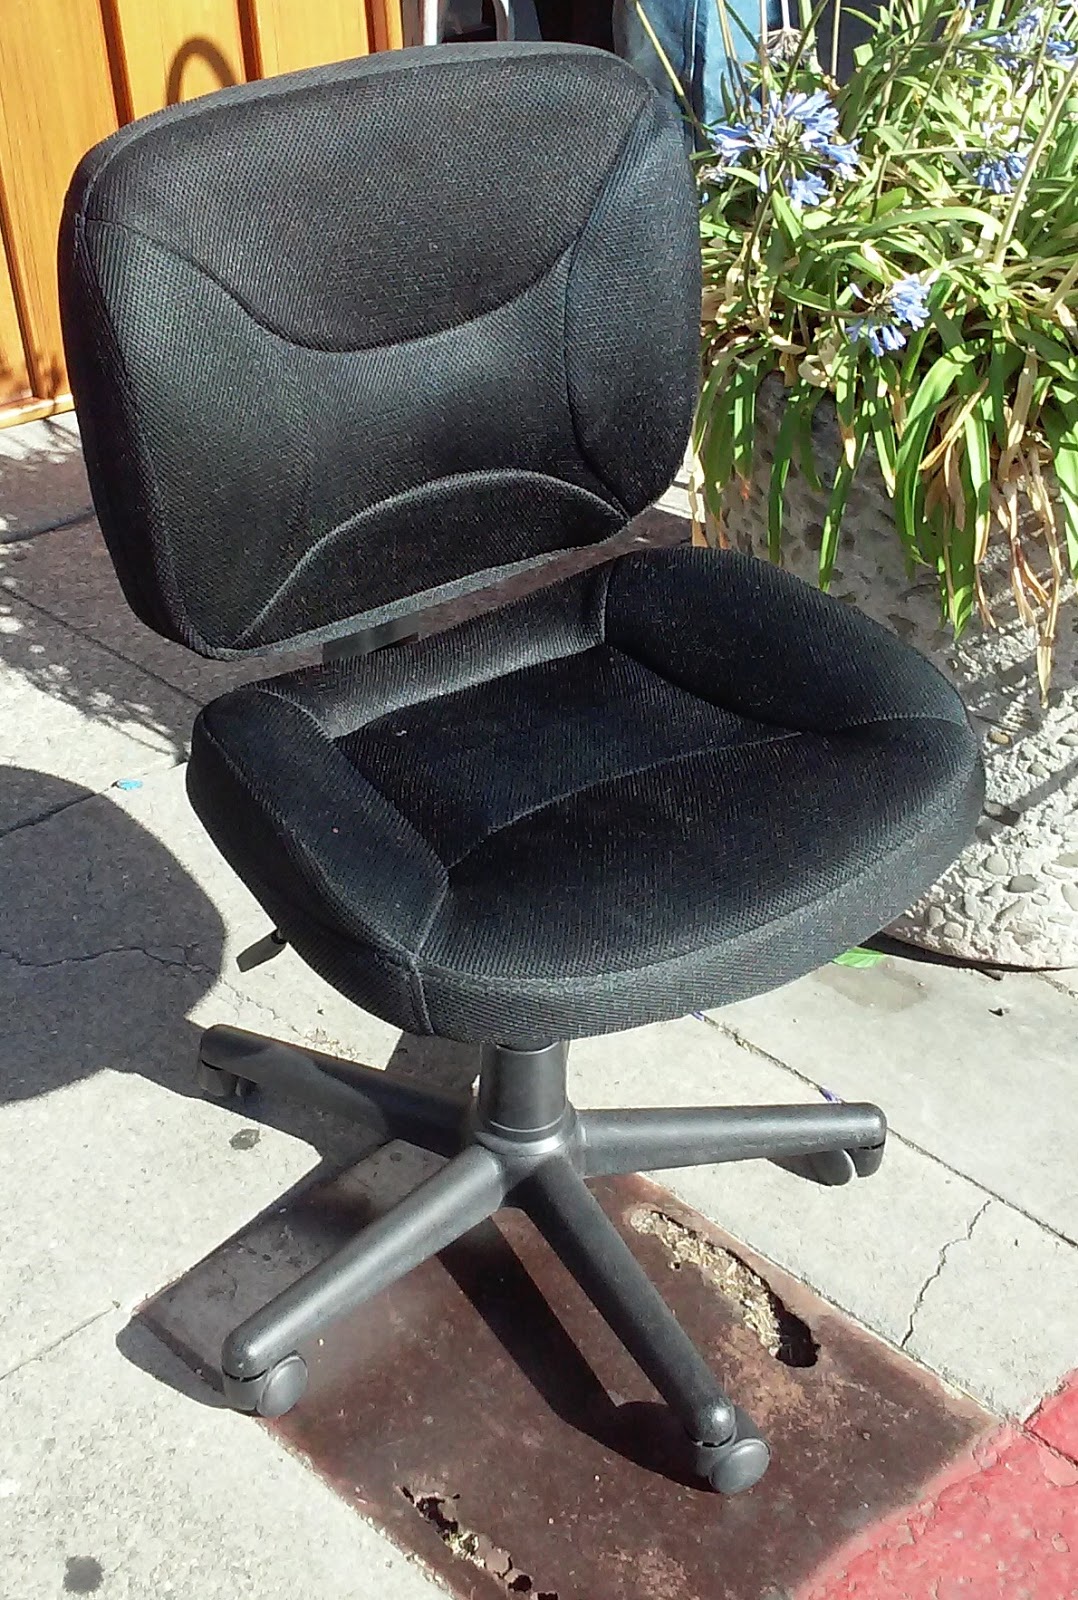 UHURU FURNITURE & COLLECTIBLES: SOLD #3447 Office Depot Task Chair - $10